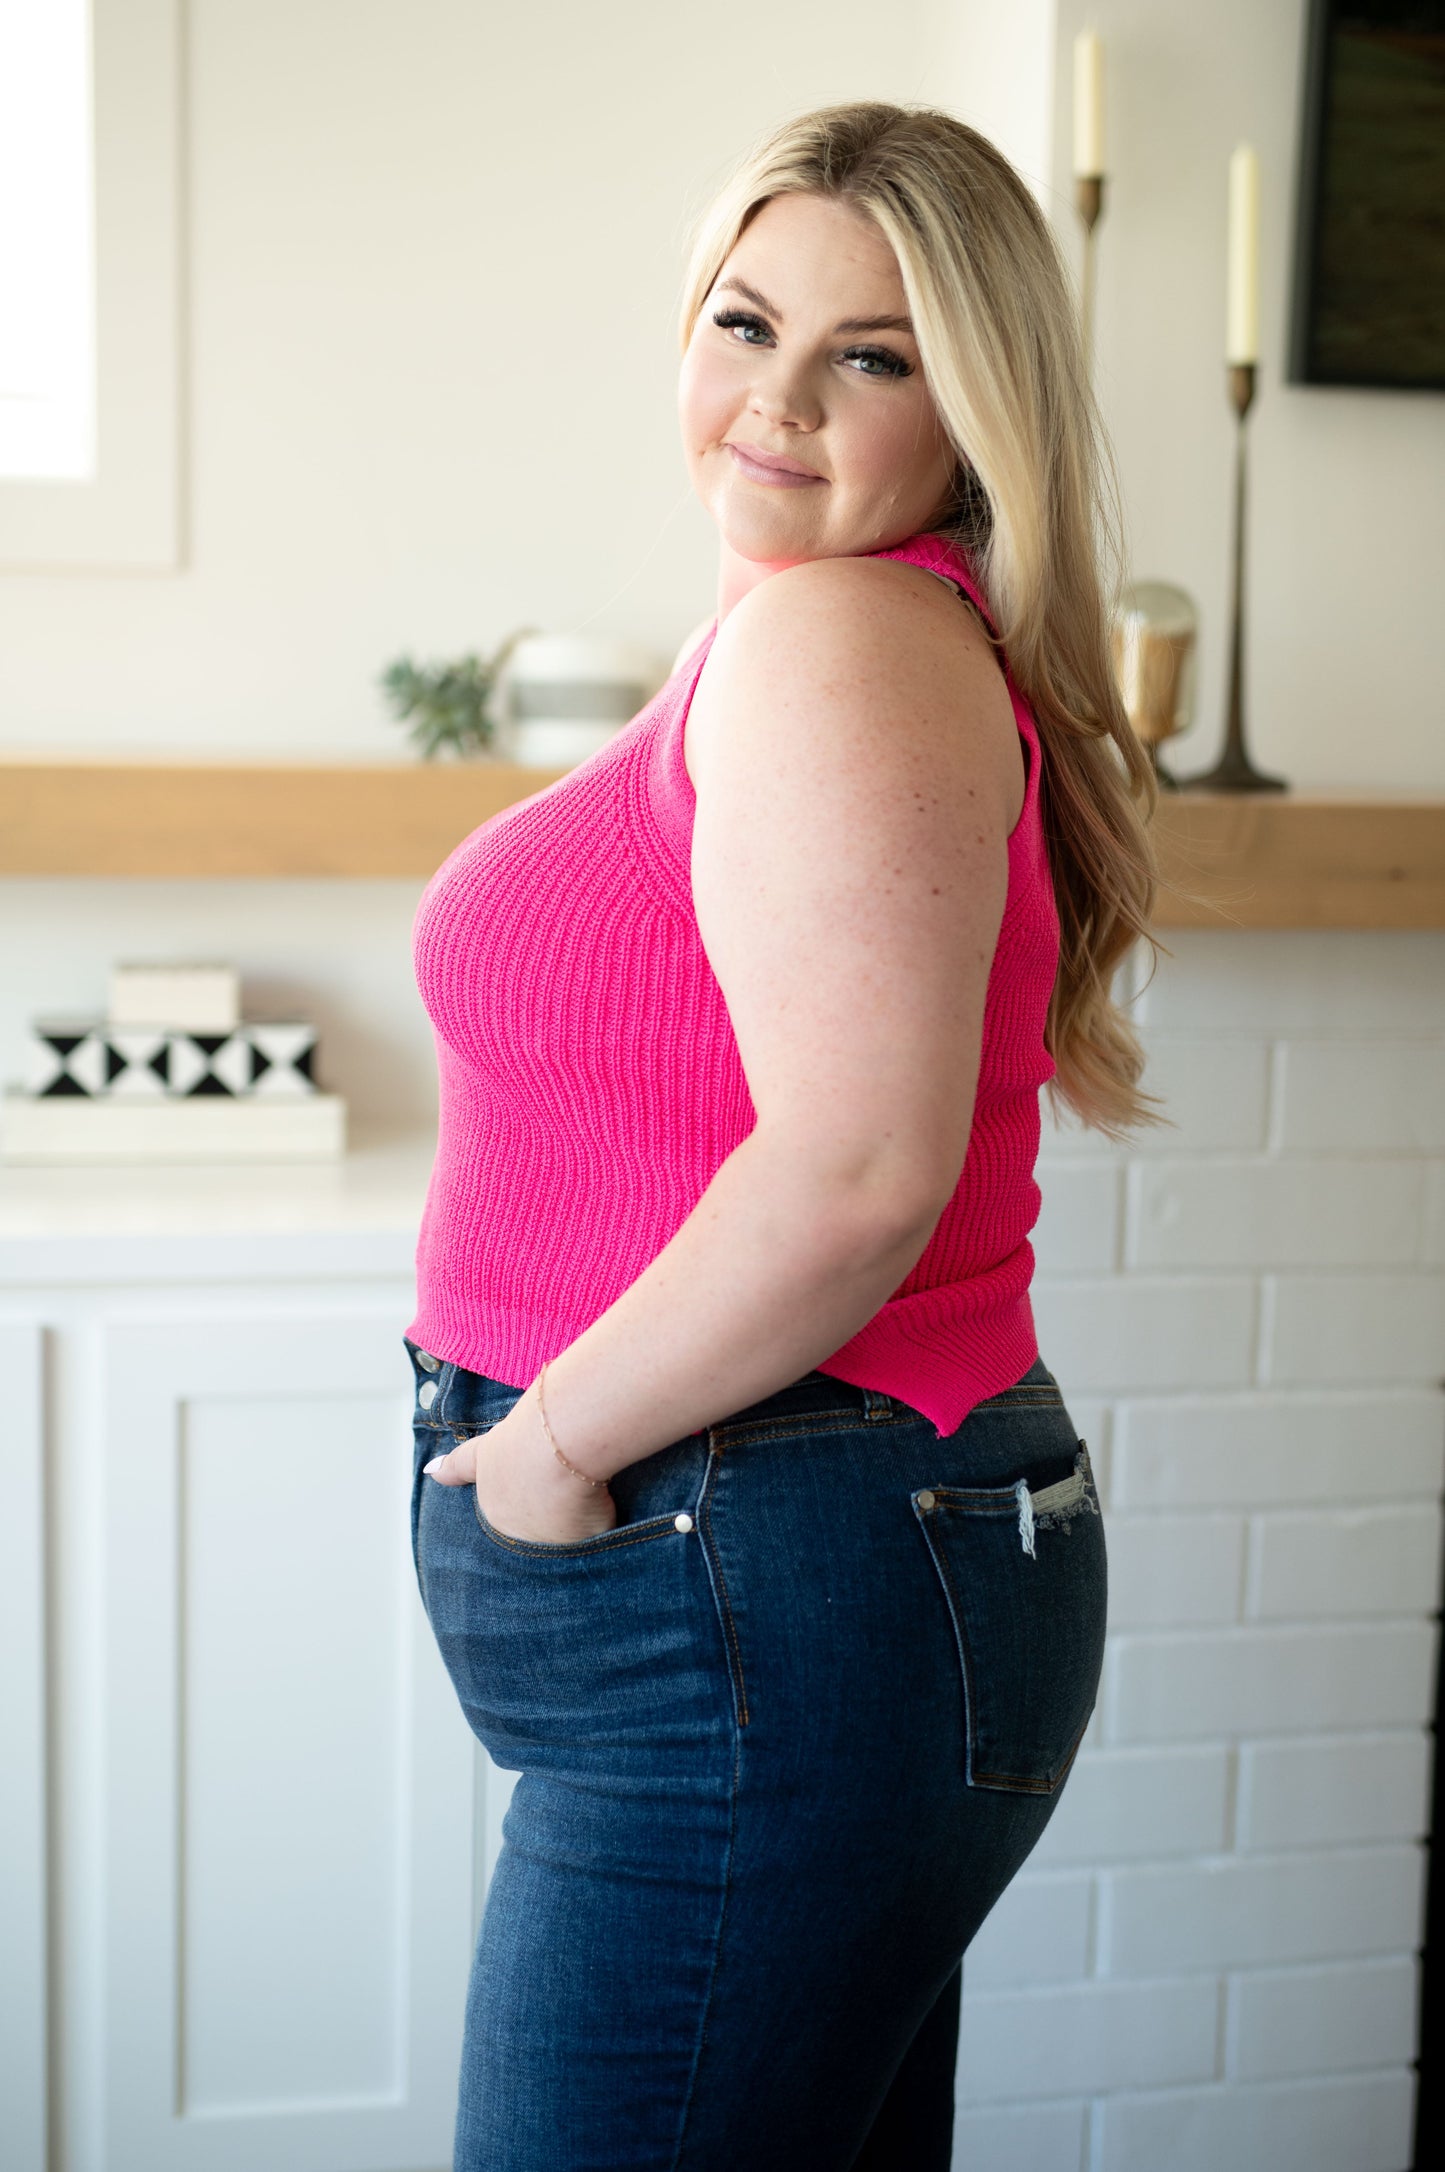 Previous Engagement Halter Neck Sweater Tank in Pink (Online Exclusive)